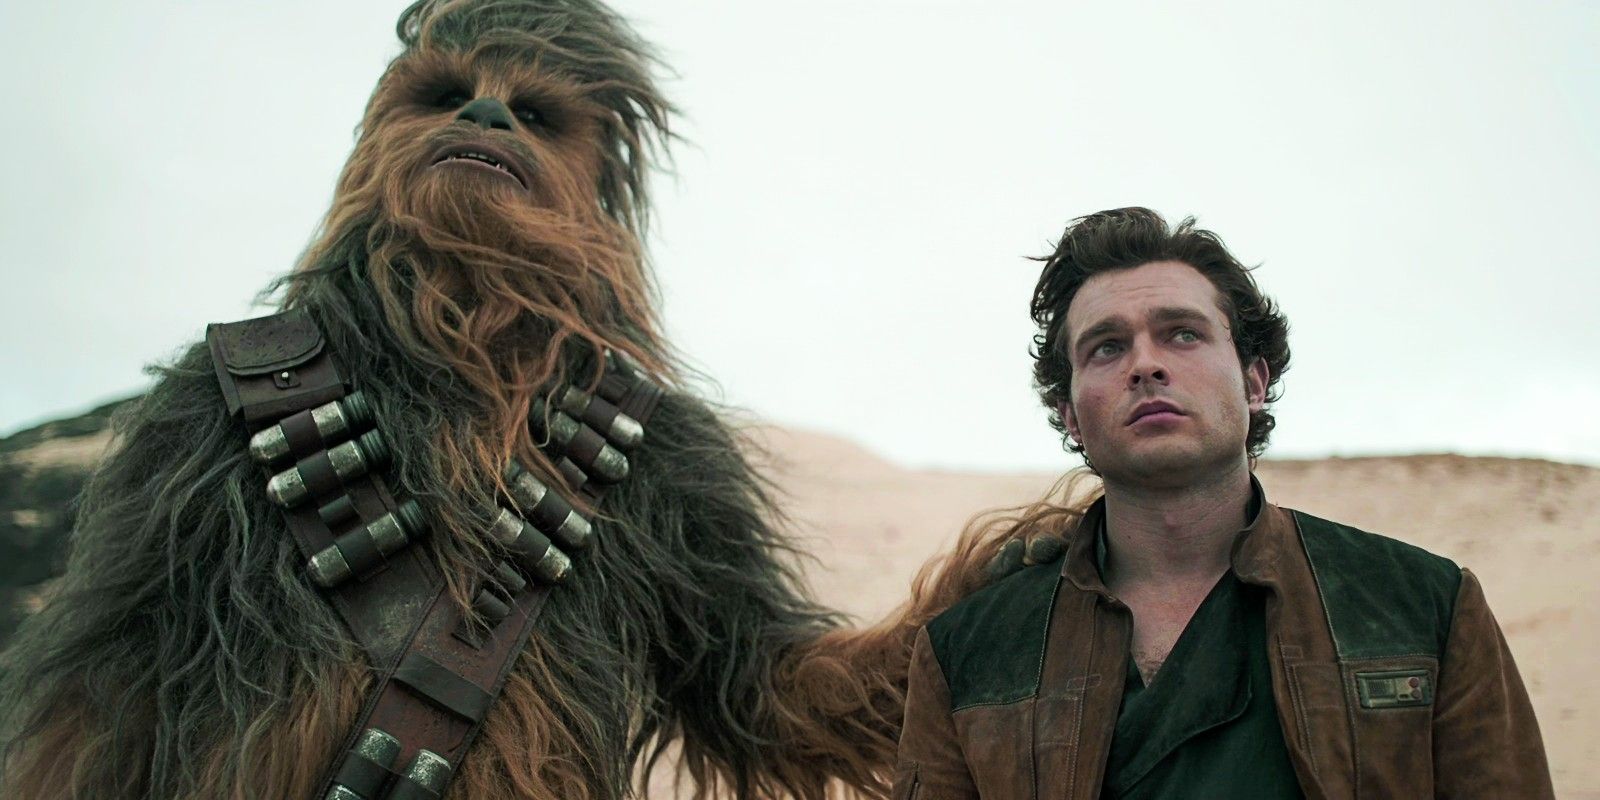 Chewbacca and Han Solo in Solo A Star Wars Story